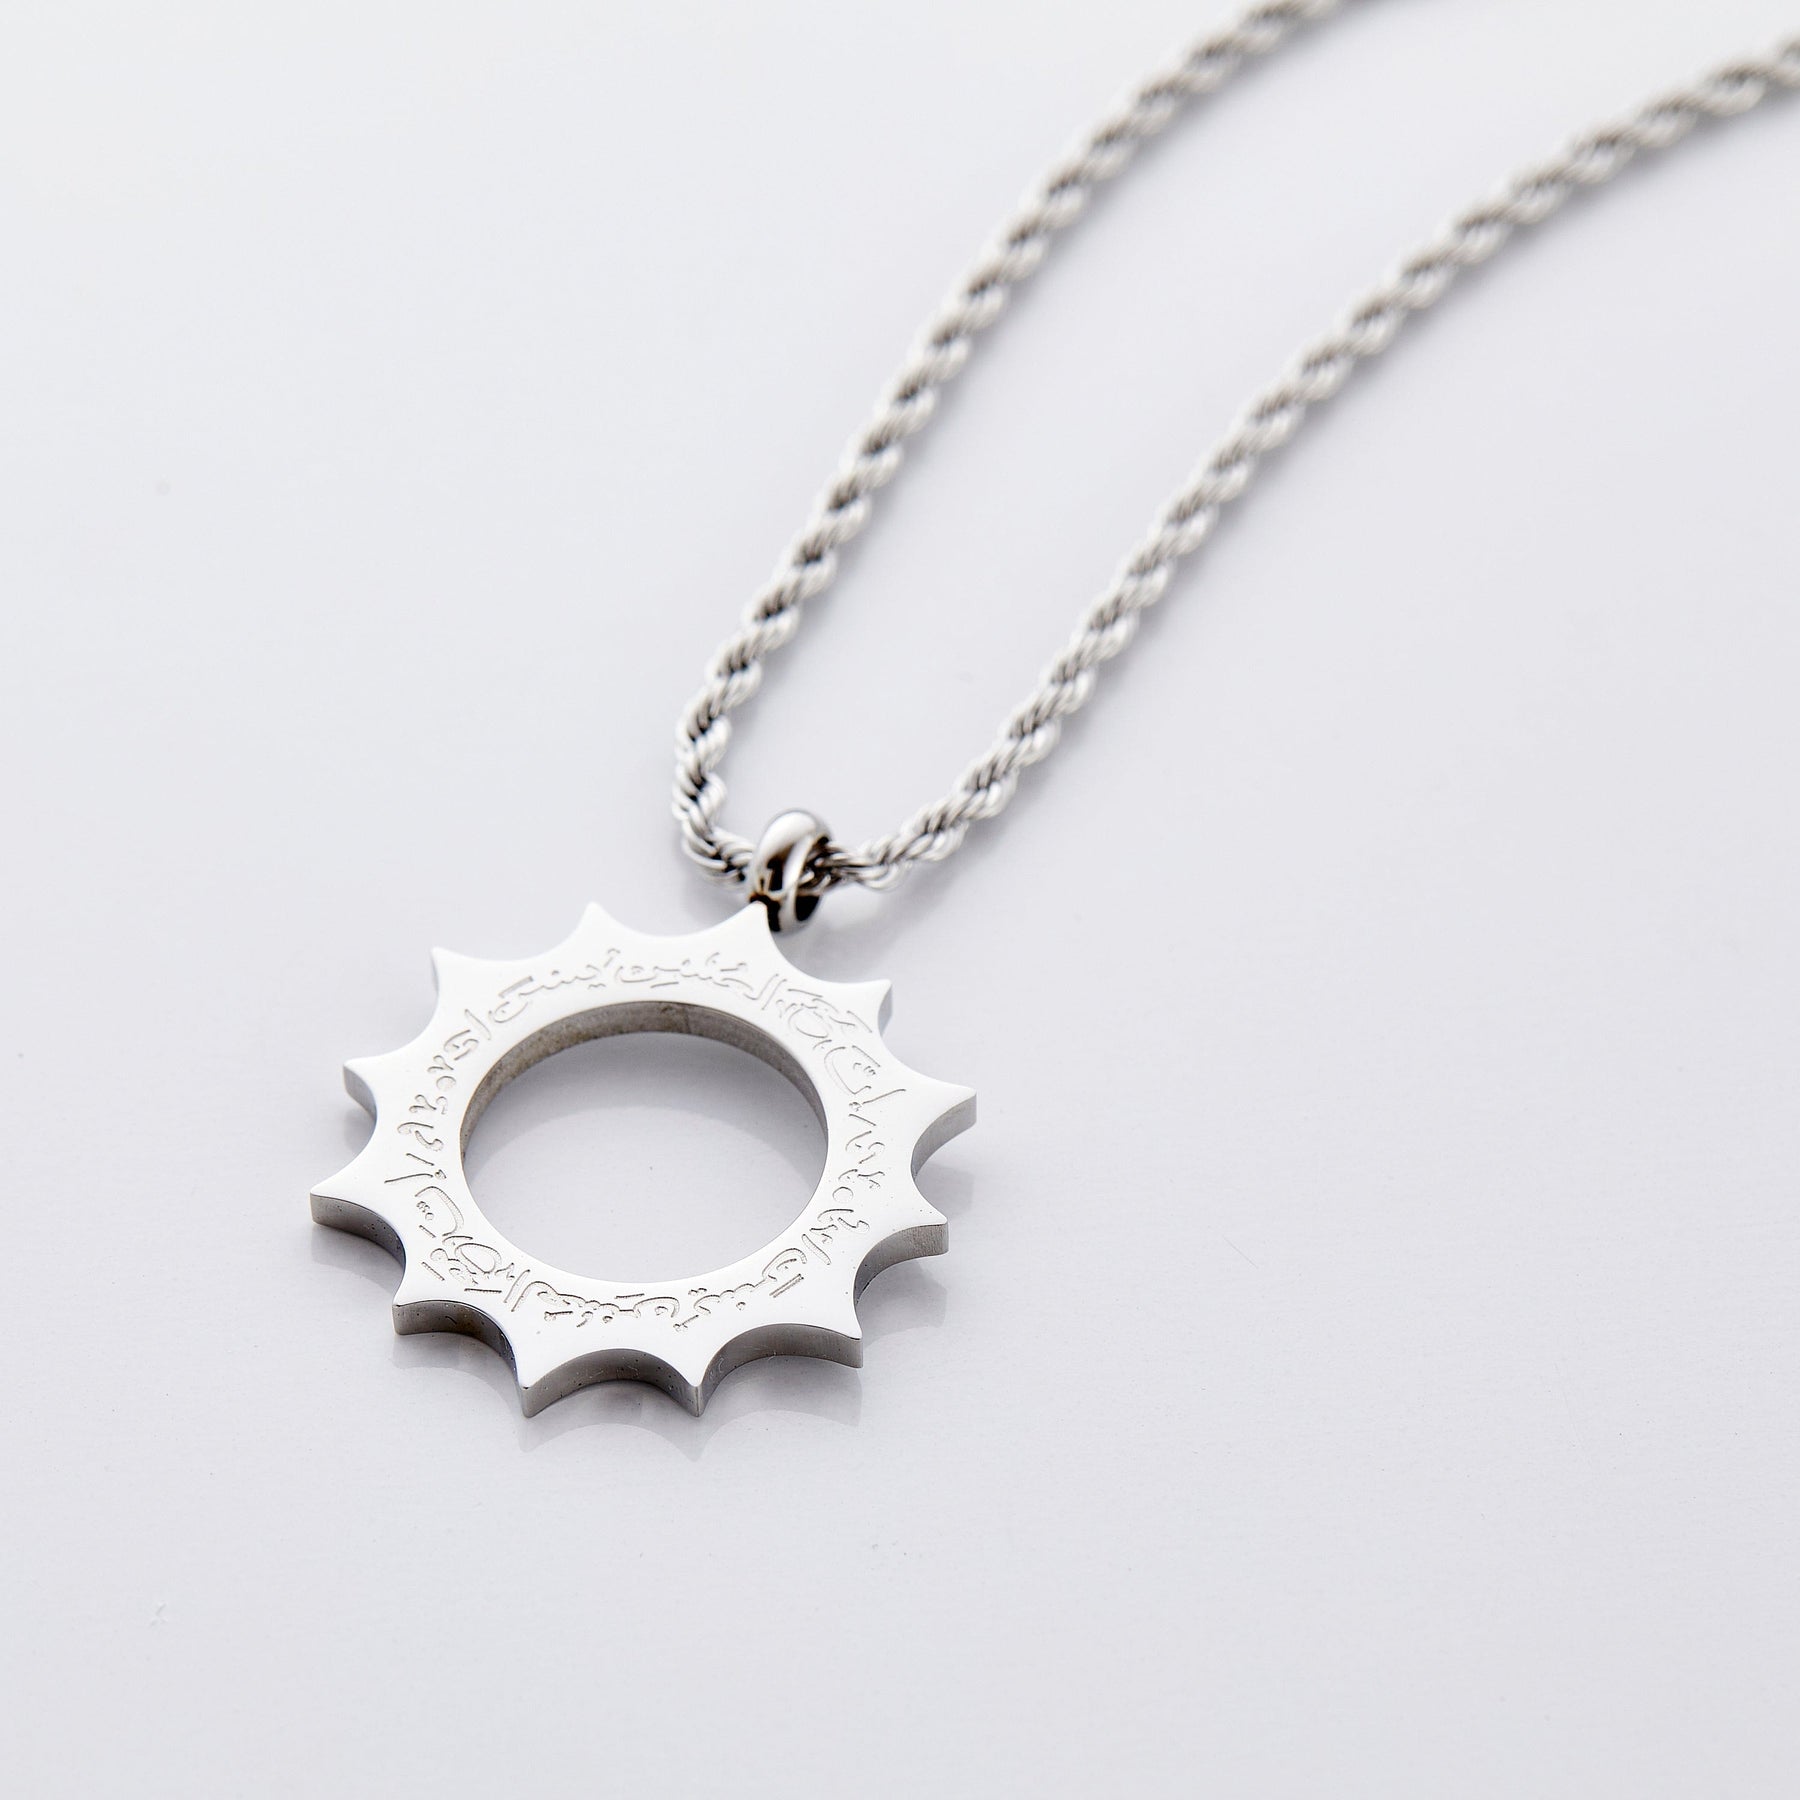 'With Hardship Comes Ease' Sun Necklace - Jeluxa